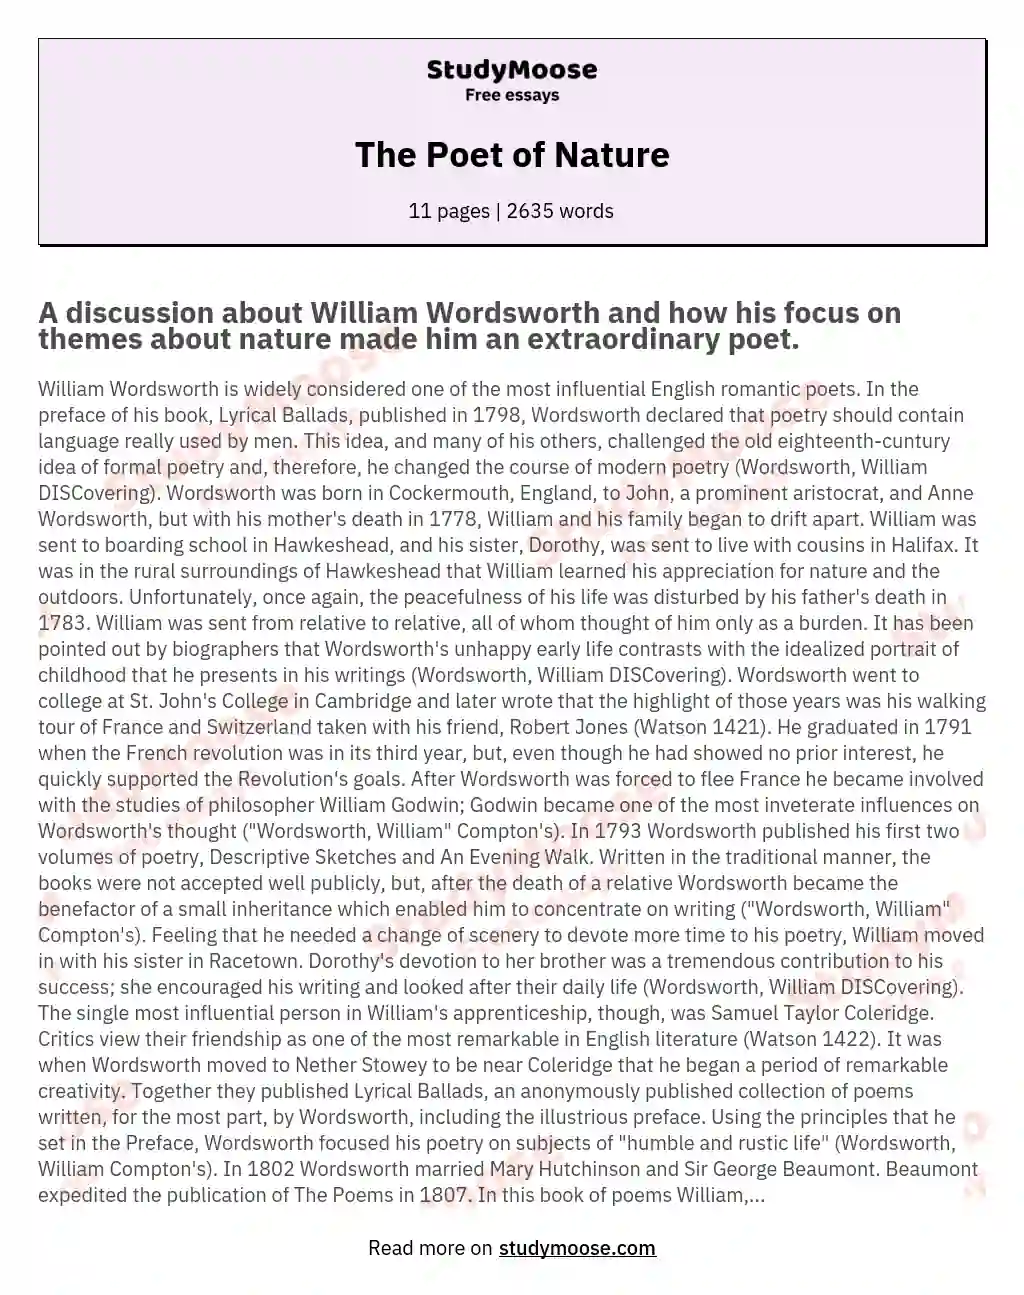 The Poet of Nature essay